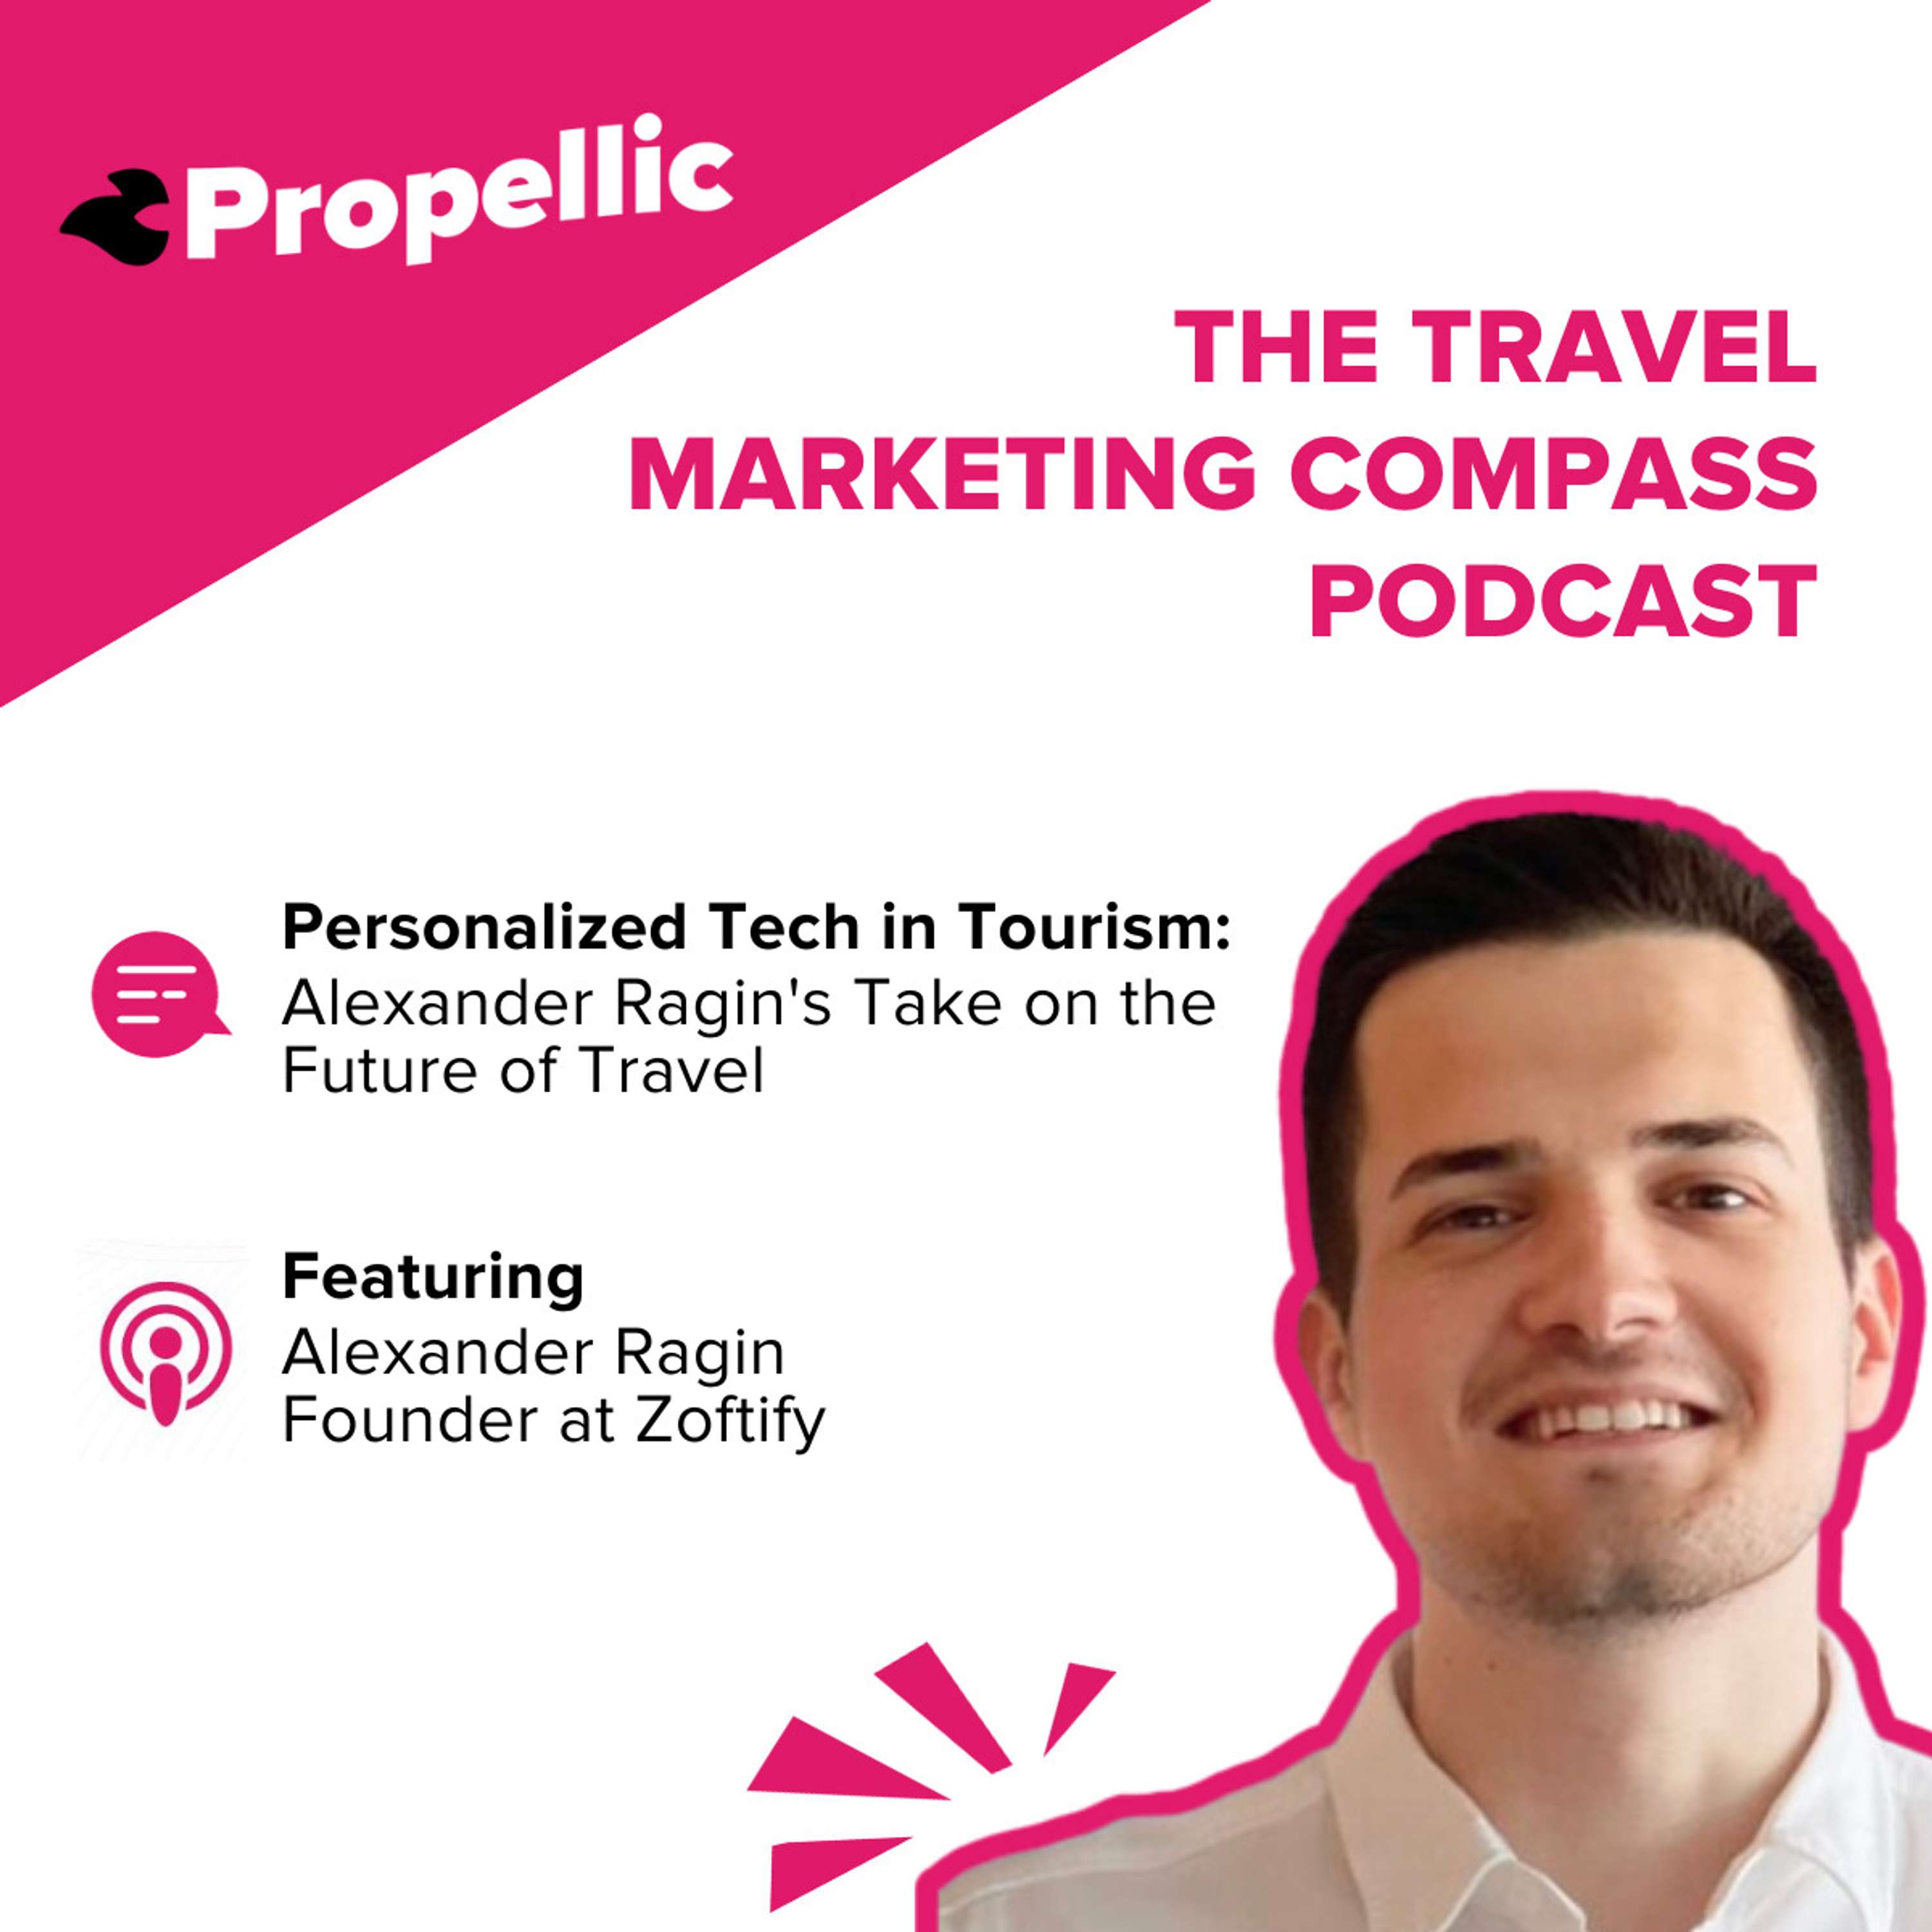 Personalized Tech in Tourism: Alexander Ragin's Take on the Future of Travel